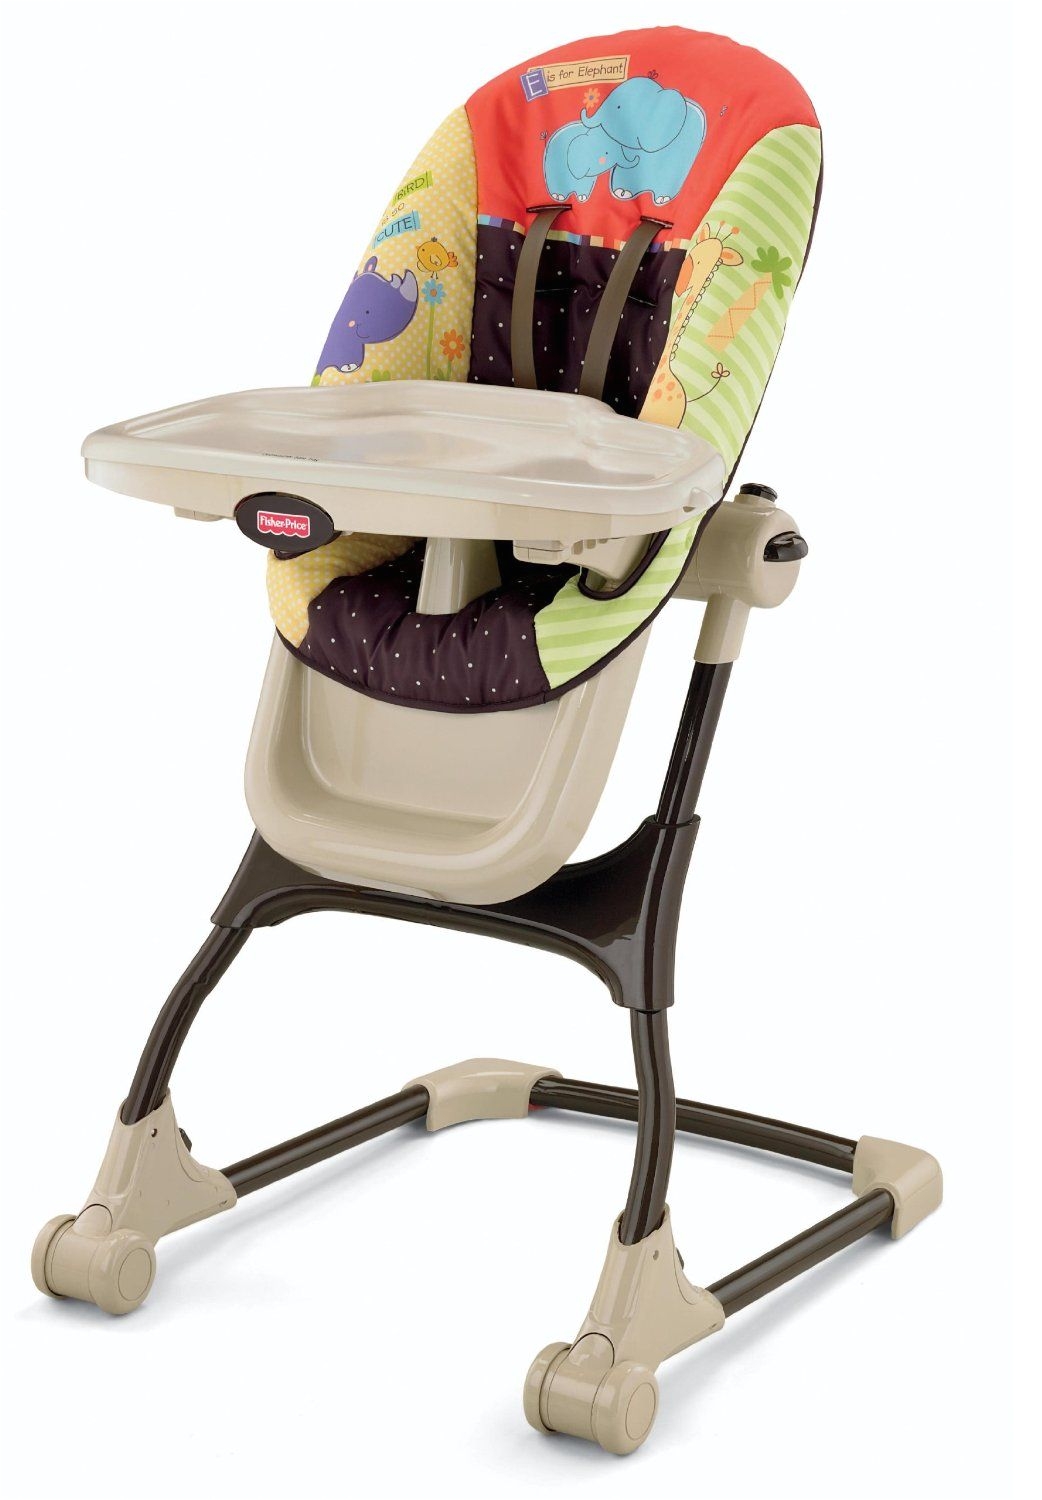 20 off select fisher price baby items hot deals